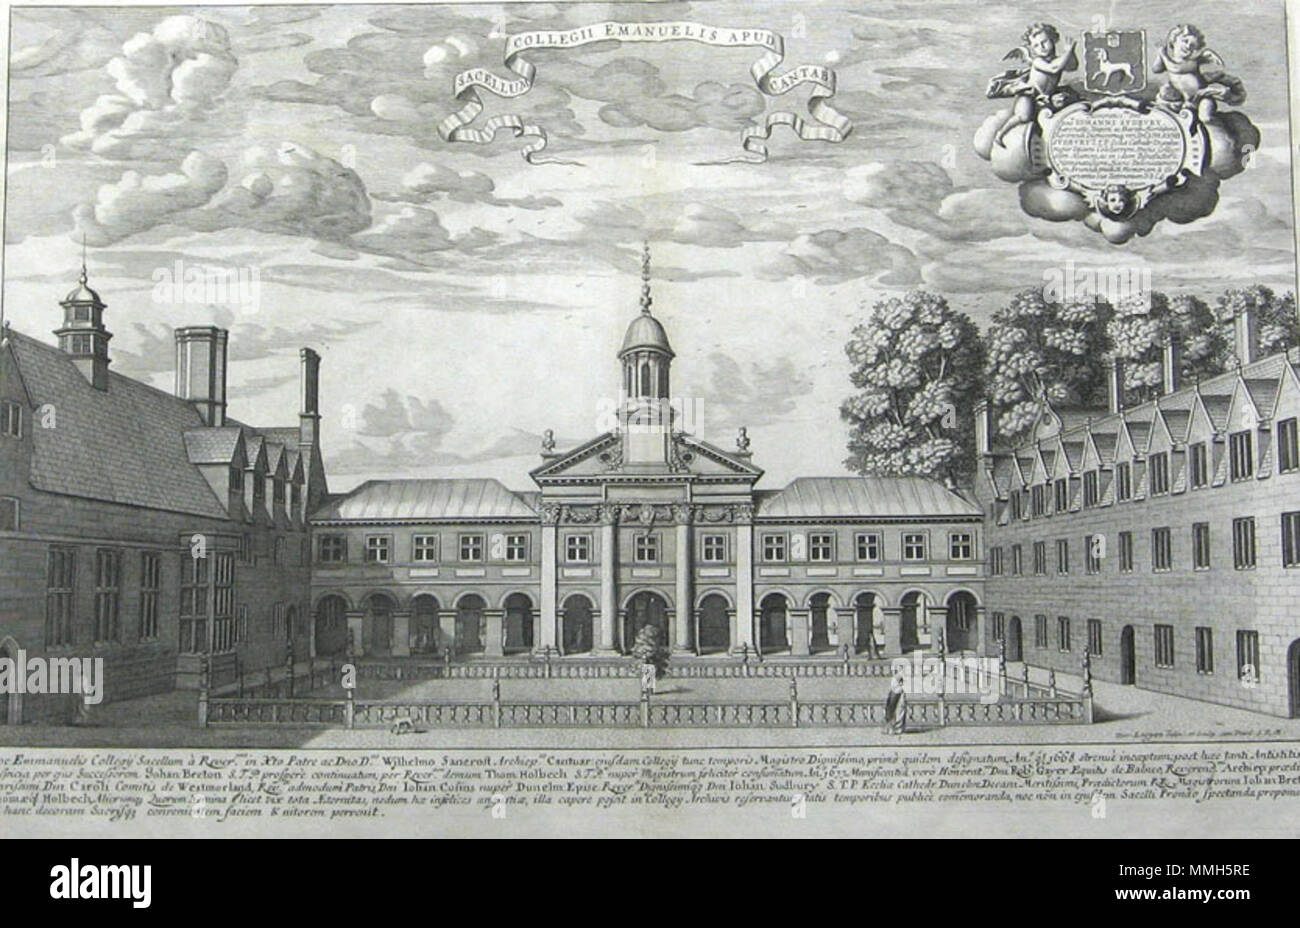 . English: View of the Chapel at Emmanuel College, Cambridge by David Loggan, published 1690  . 1690.   David Loggan  (1634–1692)    Description English artist and engraver  Date of birth/death August 1634 July 1692  Location of birth/death Gda?sk London  Authority control  : Q5236742 VIAF:?88085606 ISNI:?0000 0001 1856 4291 ULAN:?500030441 LCCN:?n84133161 GND:?131599224 WorldCat Emmanuel College Chapel, Cambridge by Loggan 1690 - sanders 6176 Stock Photo